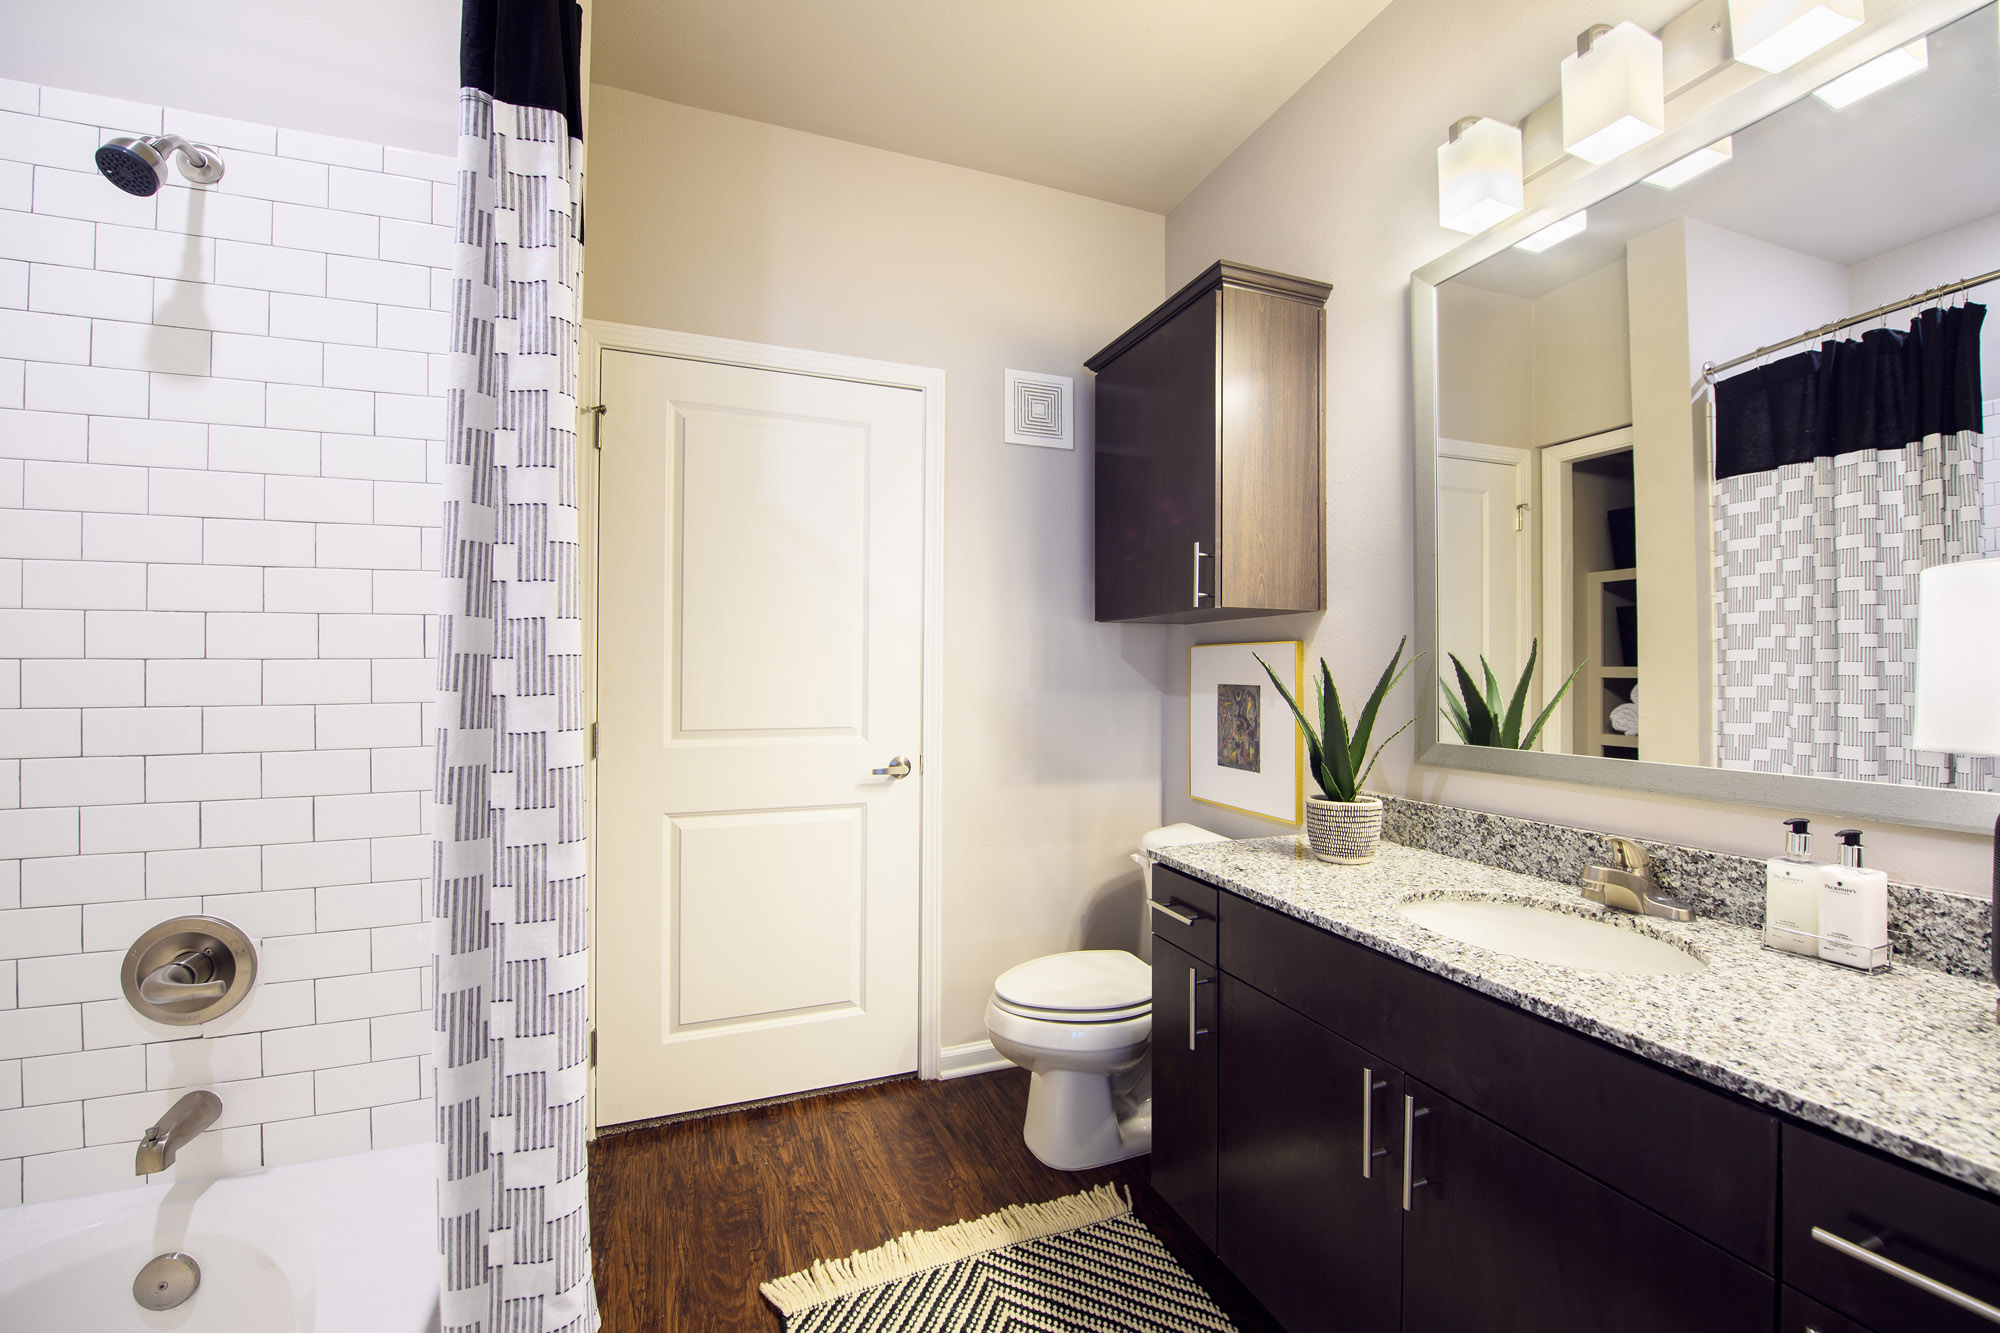 Park Rowe Village - Apartment 2331 - Bathroom with white tile and grey countertops dark cabinetry